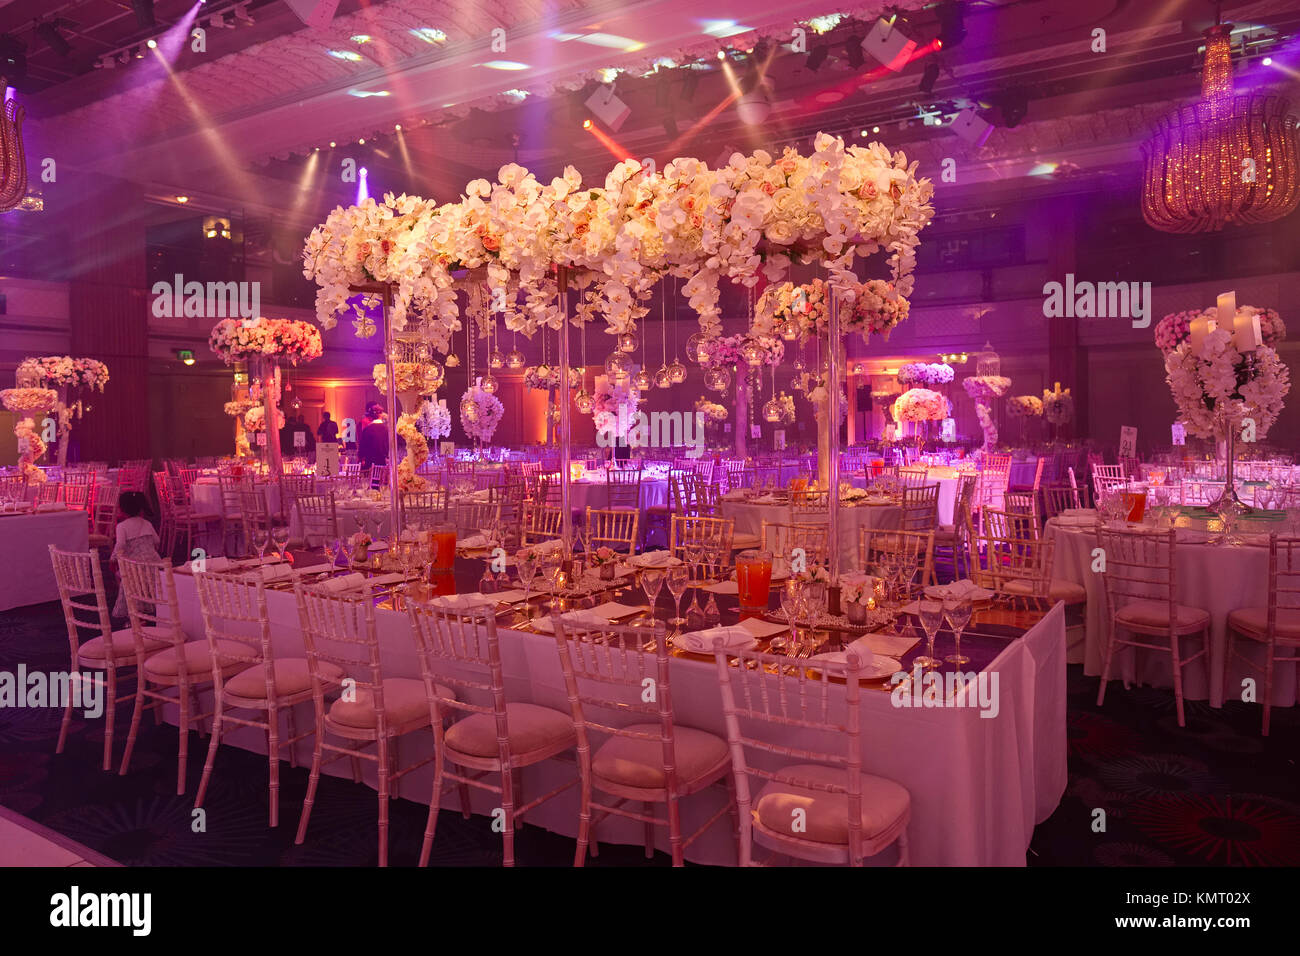 Table decorations at high end hotel wedding reception event Stock Photo